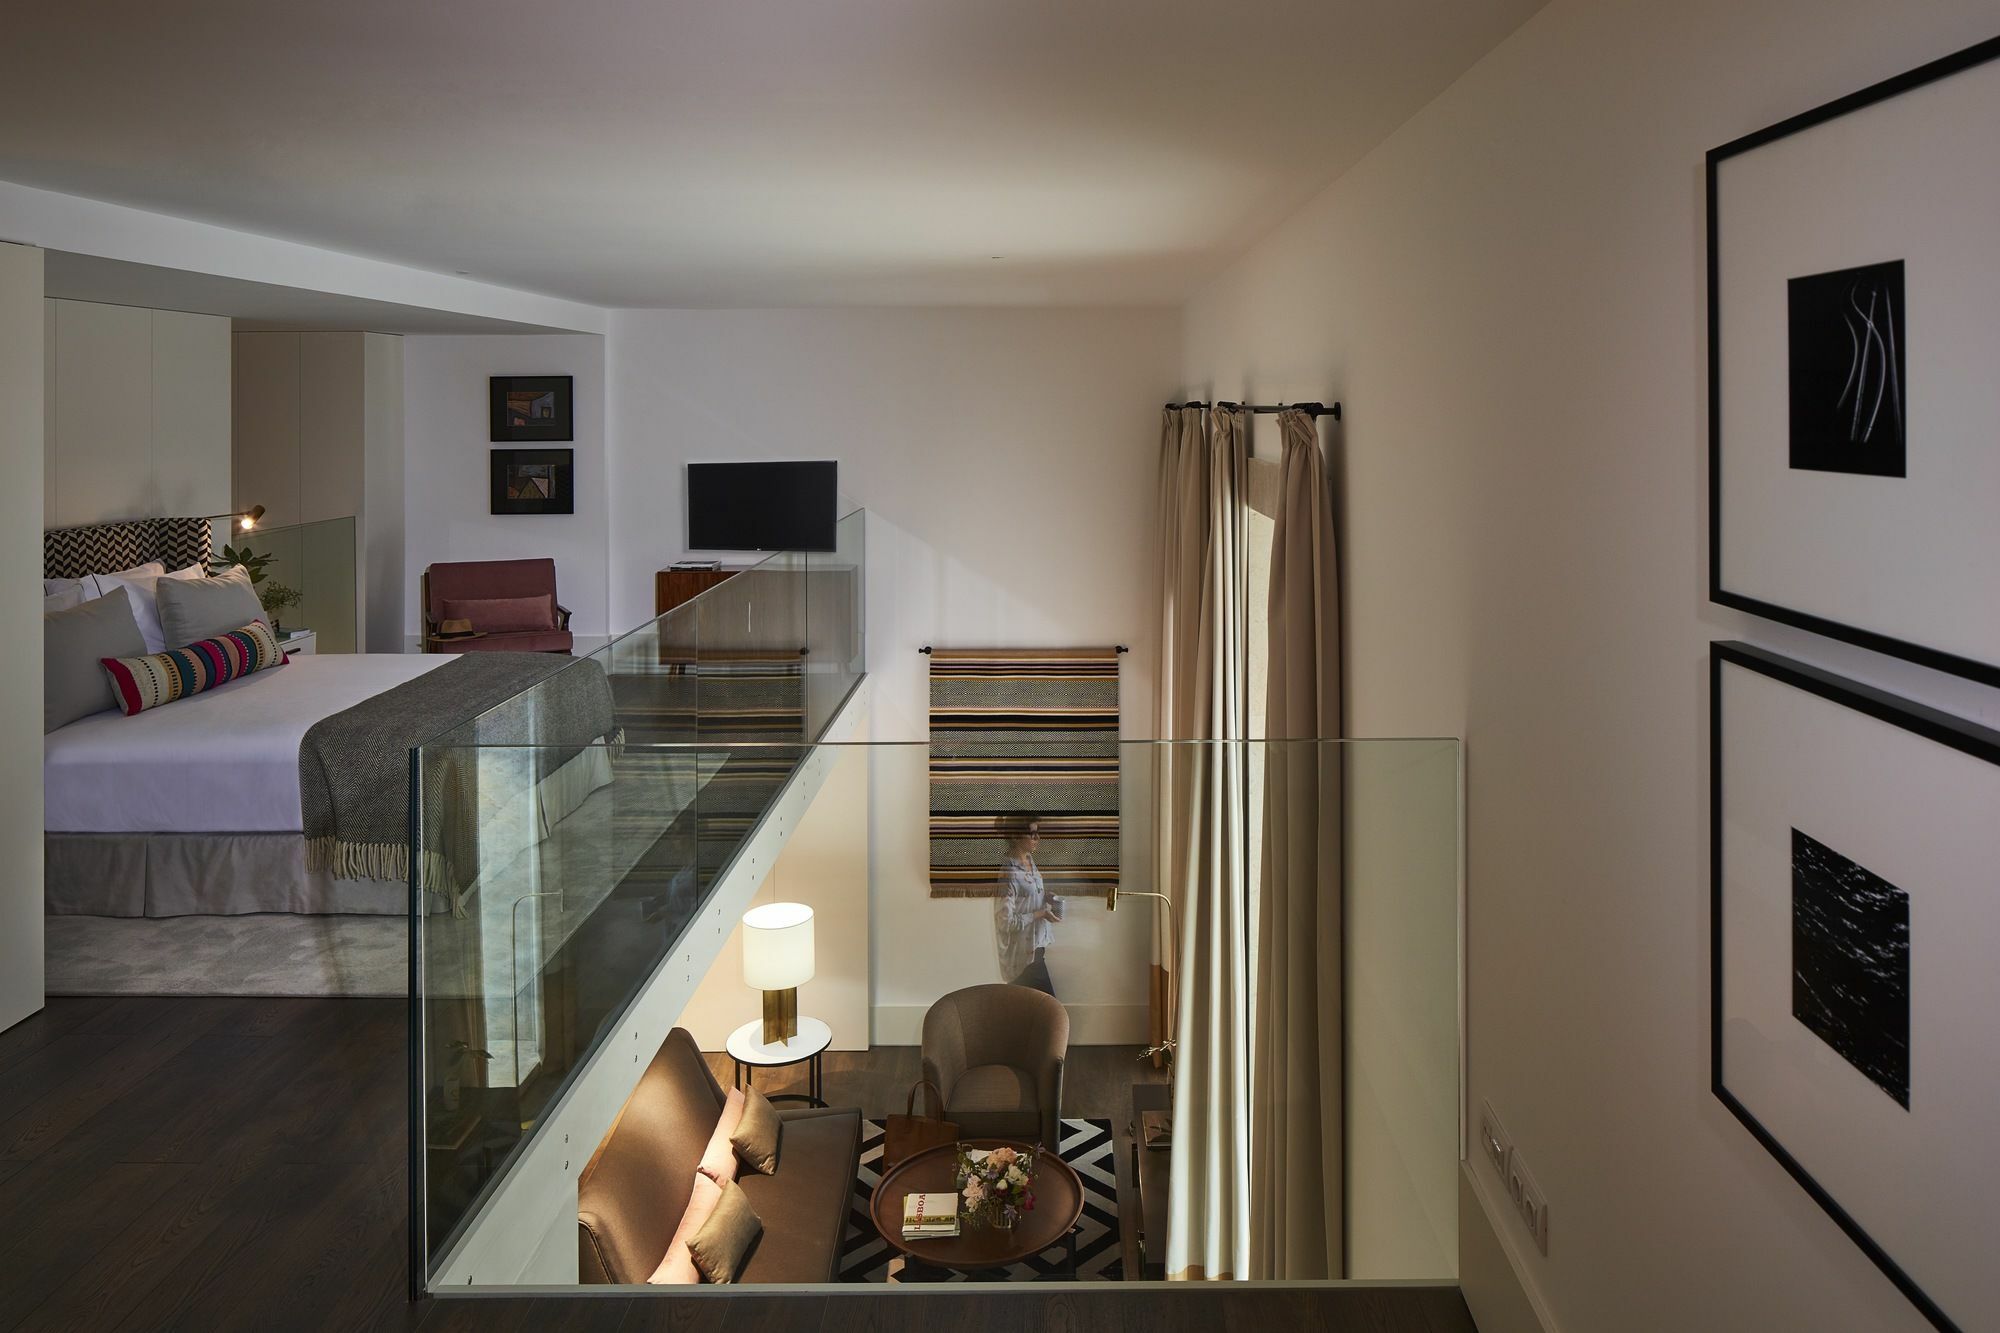 The Lumiares Hotel & Spa - Small Luxury Hotels Of The World Lissabon Buitenkant foto